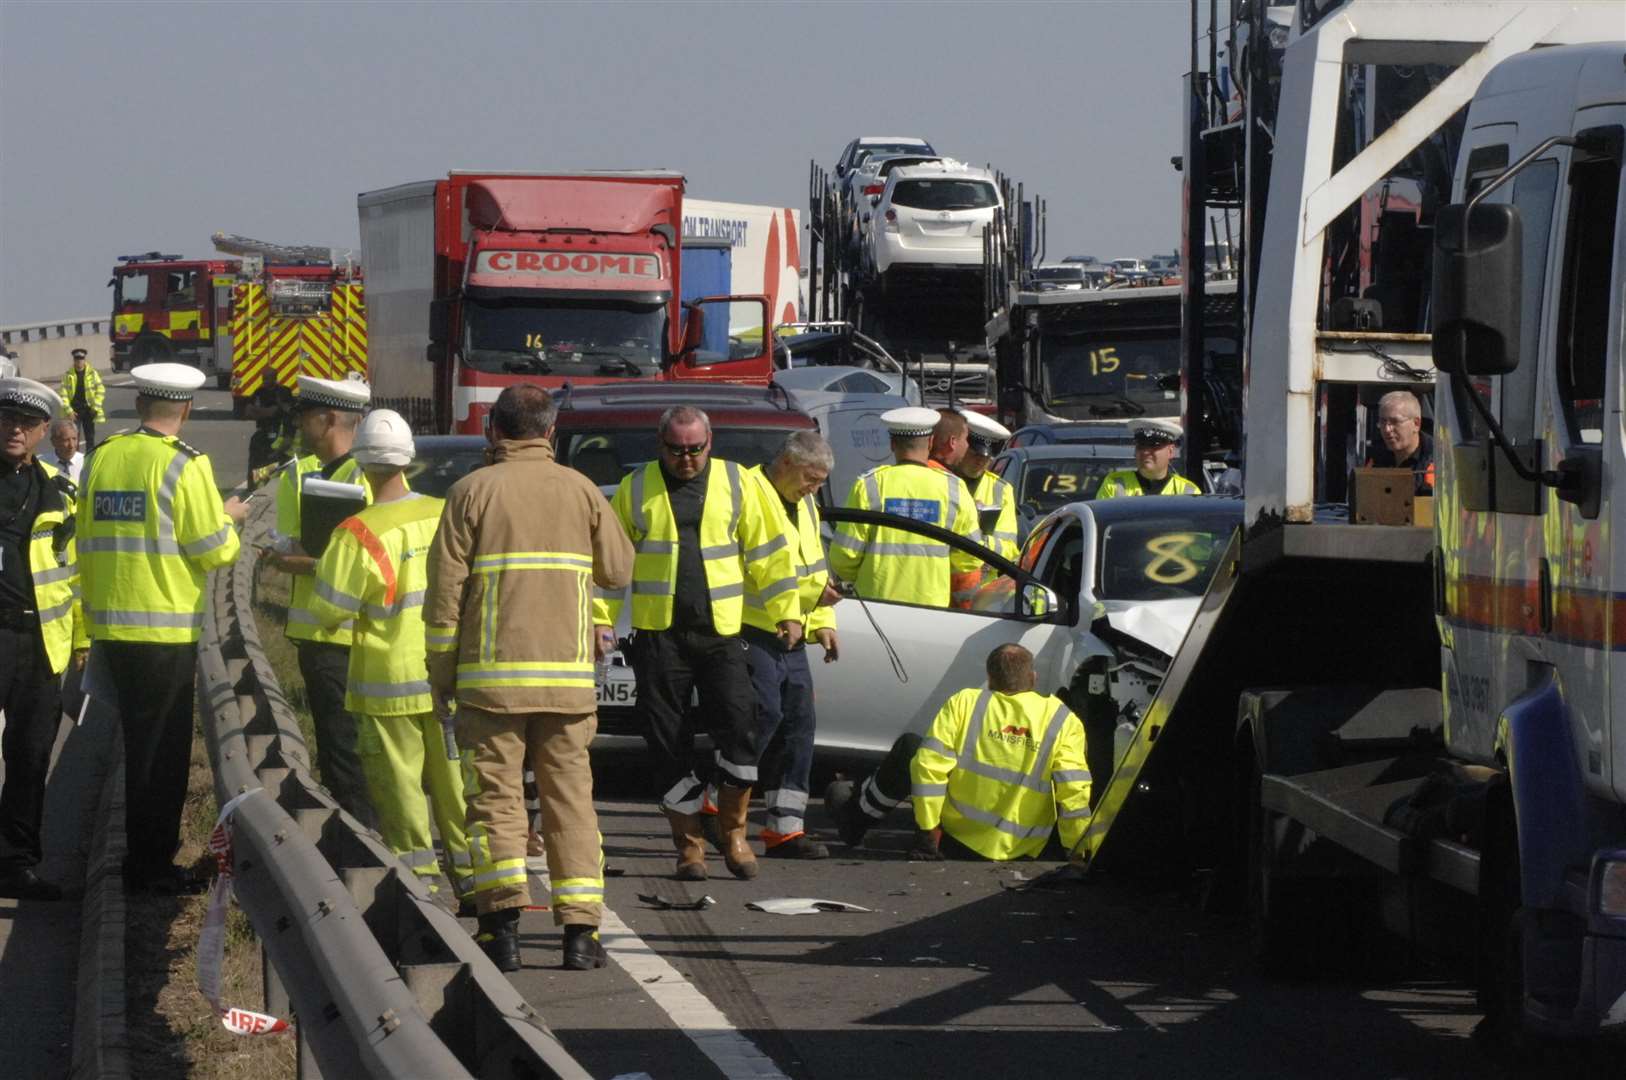 The scene at the Sheppey Crossing following the crash in 2013. Picture: Chris Davey